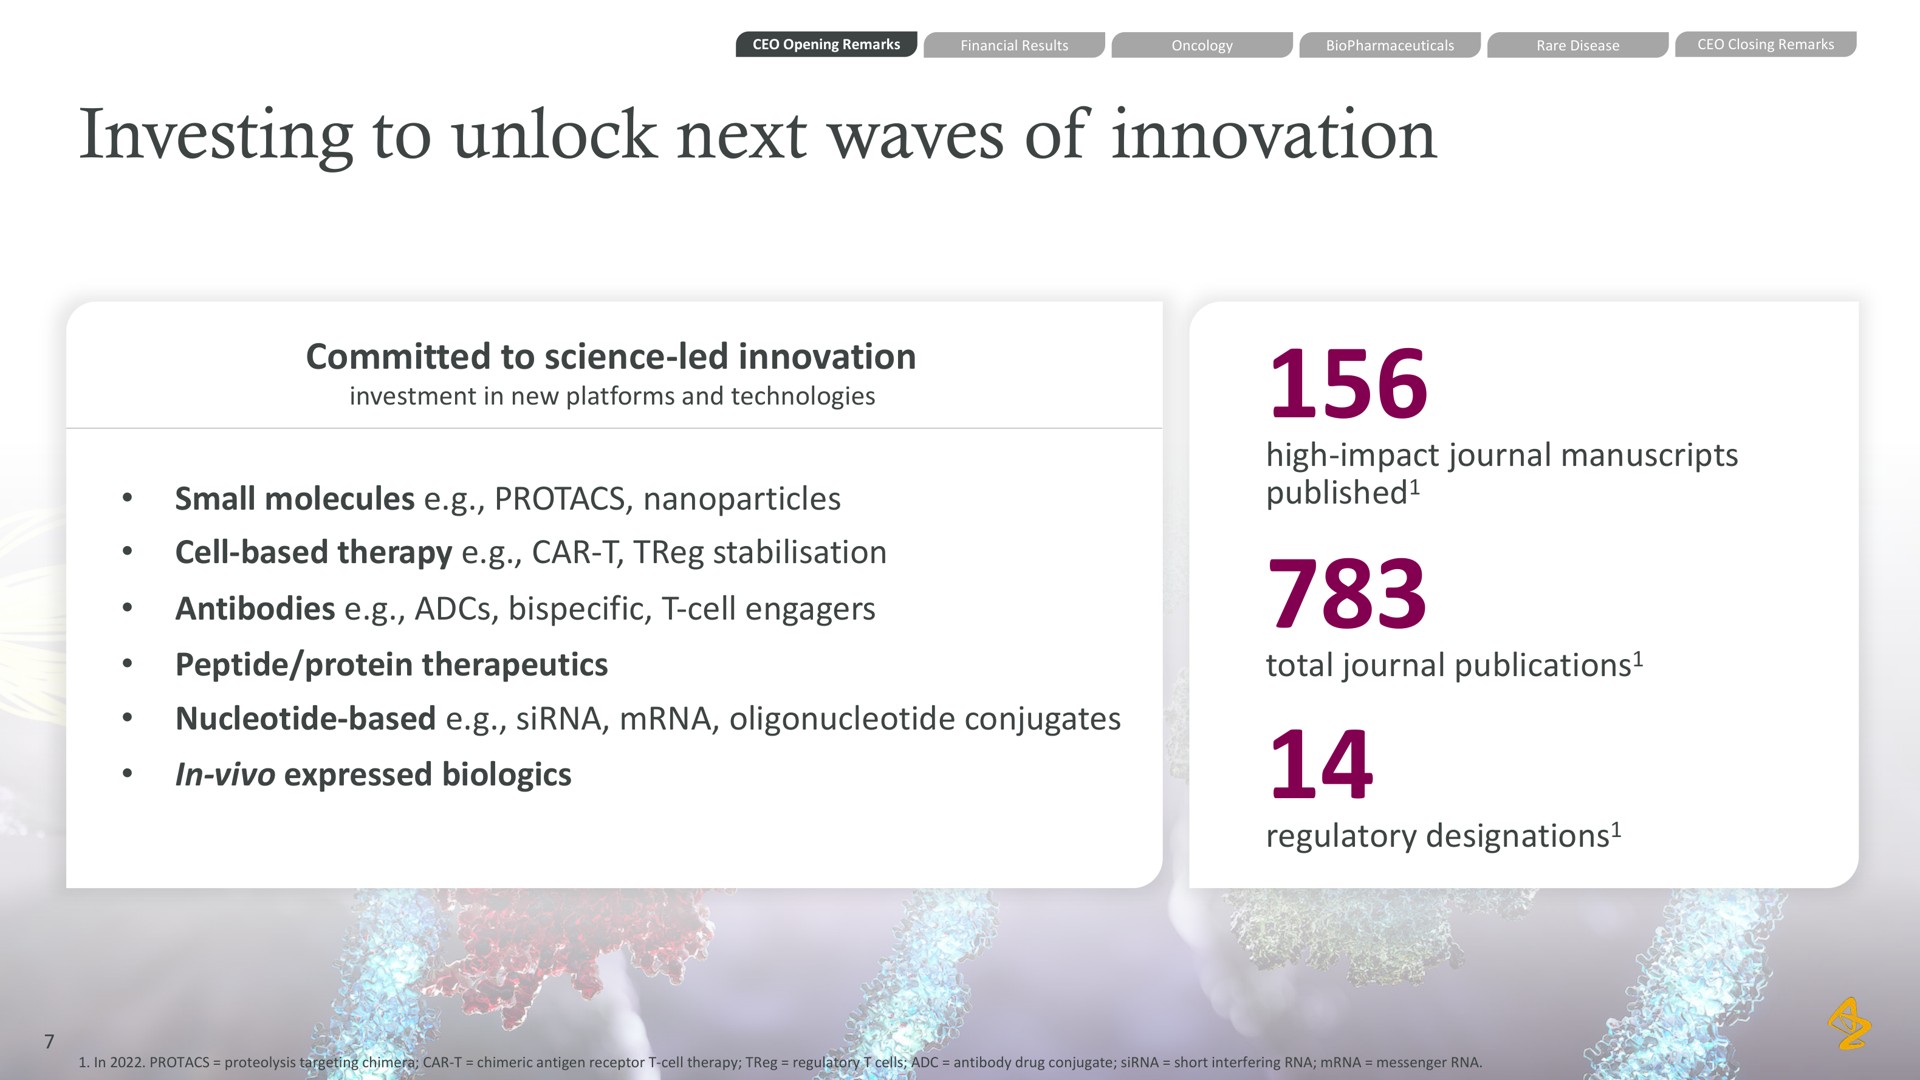 investing to unlock next waves of innovation committed to science led innovation small molecules cell based therapy car antibodies cell nucleotide based conjugates peptide protein therapeutics in expressed high impact journal manuscripts published total journal publications regulatory designations | AstraZeneca